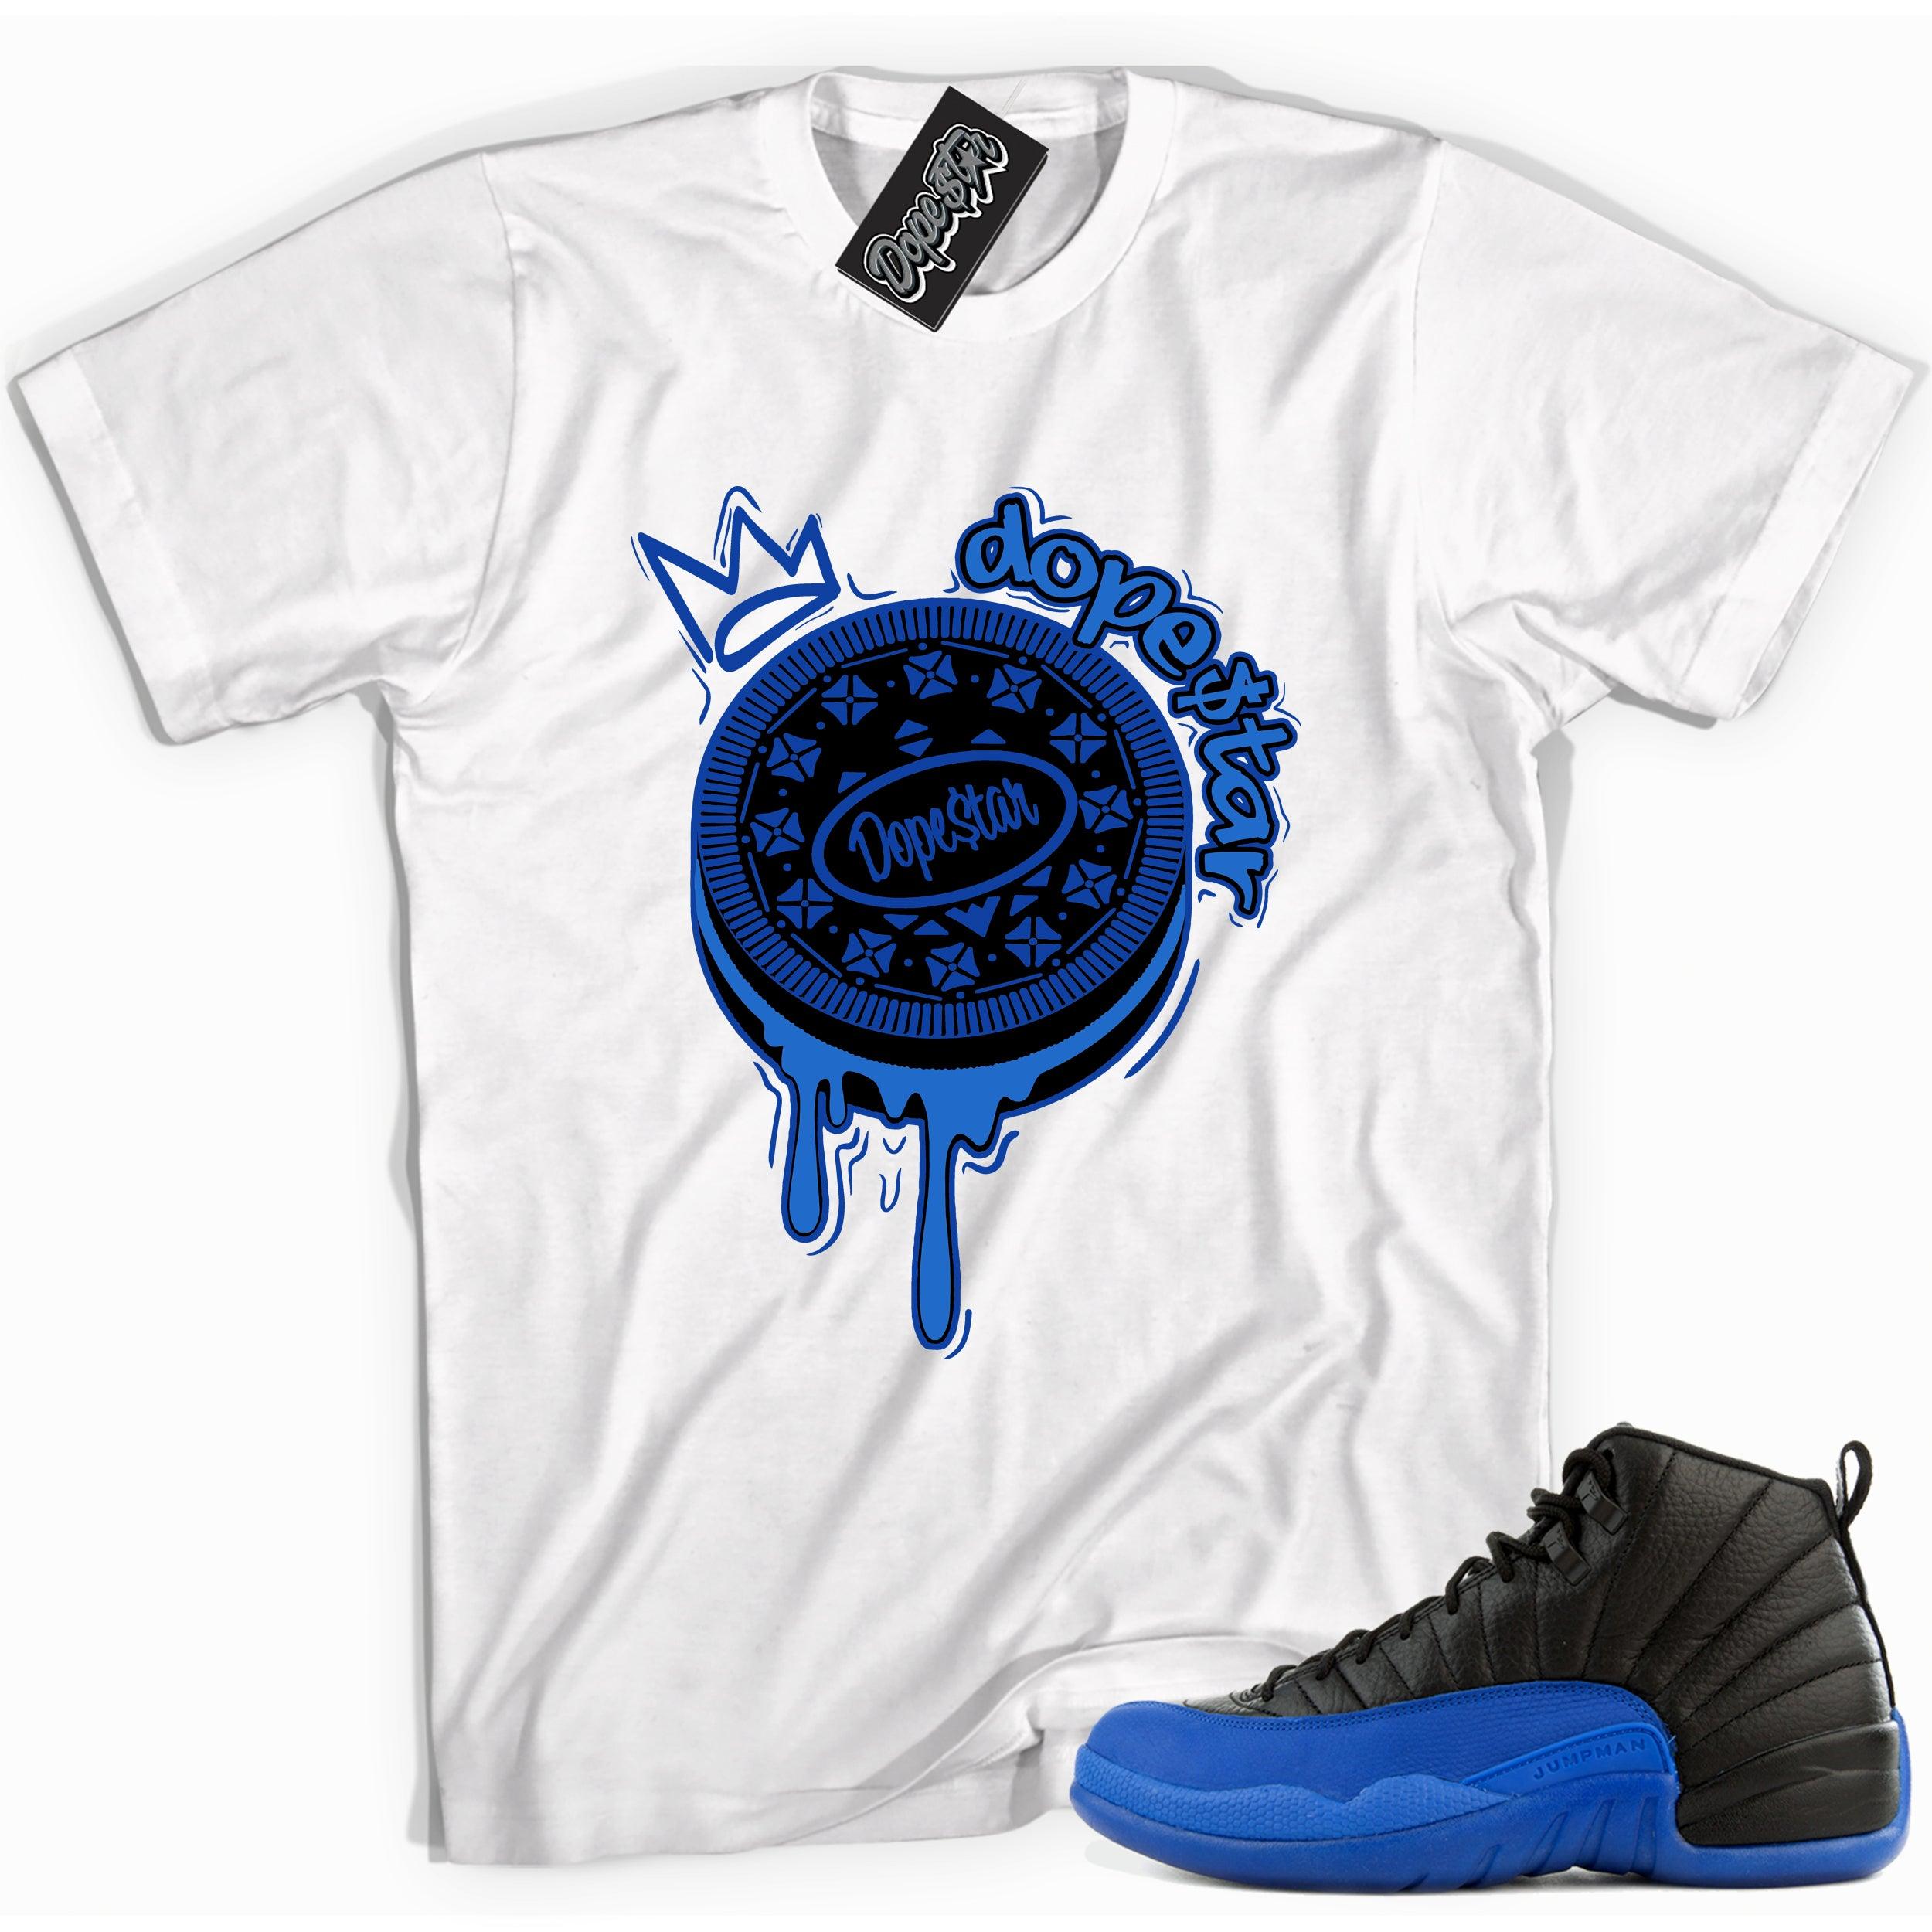 Cool white graphic tee with 'Oreo dope star $' print, that perfectly matches Air Jordan 12 Retro Black Game Royal sneakers.